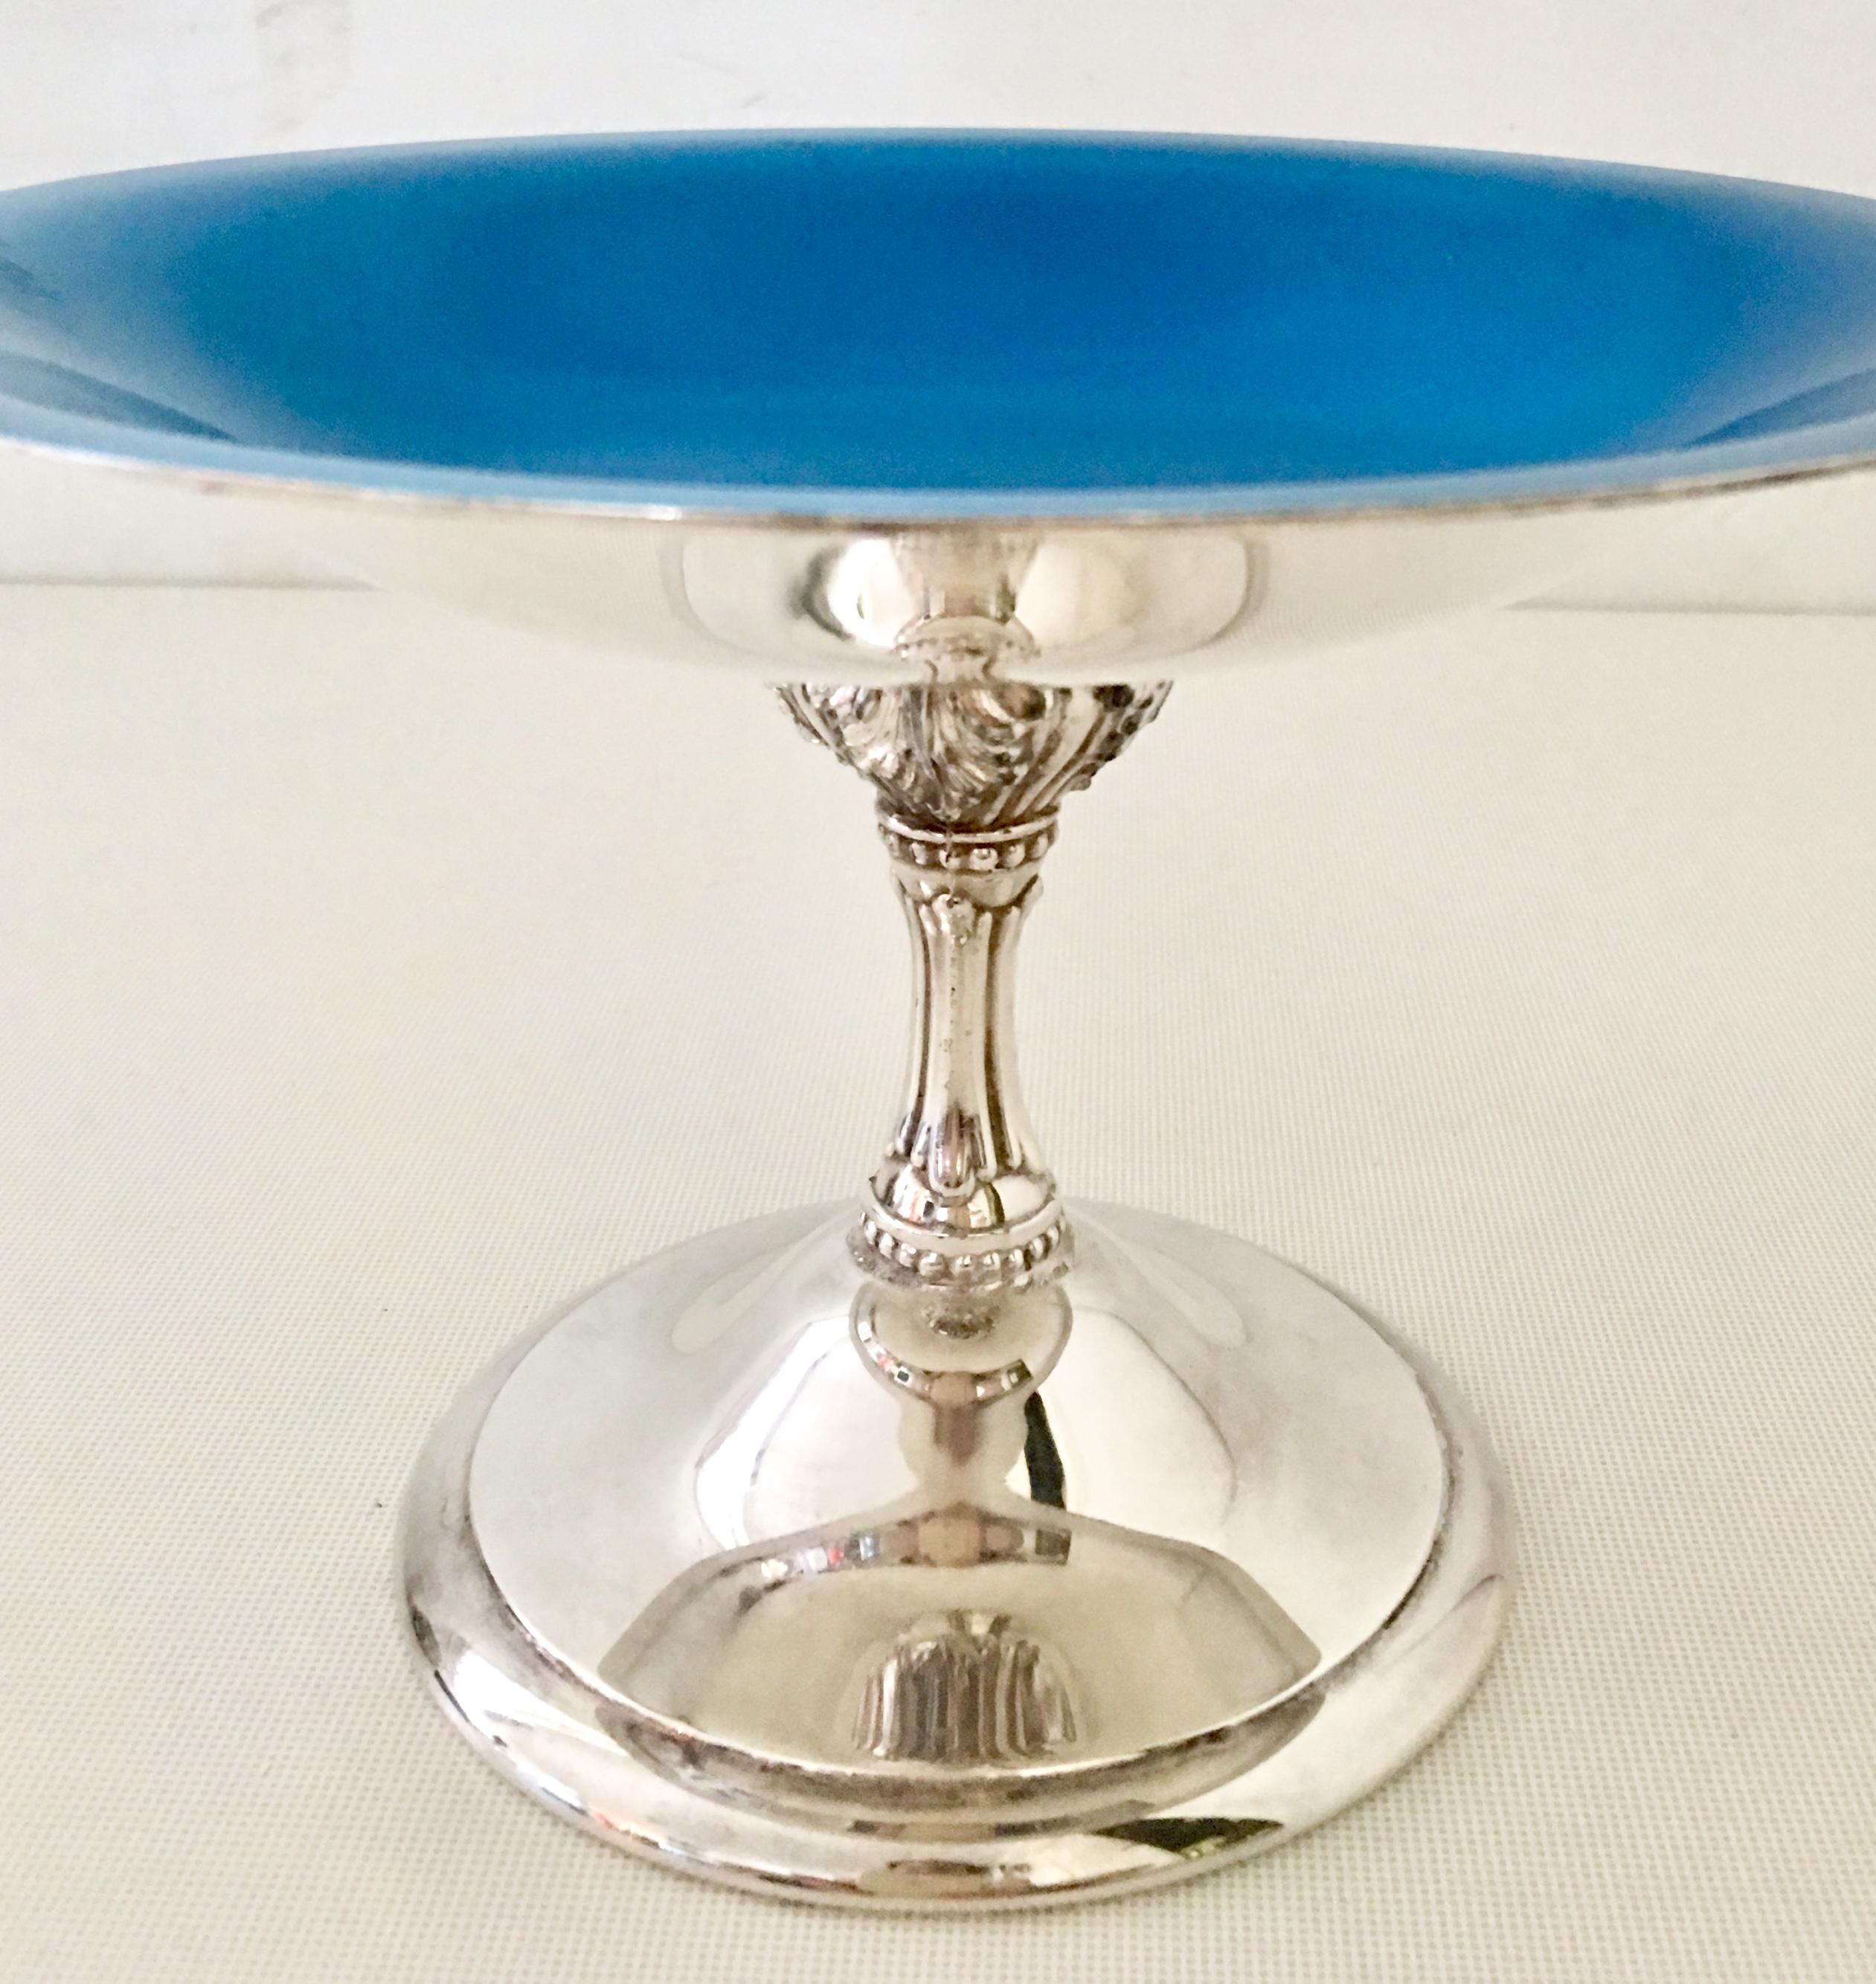 20th Century Silver Plate and Enamel Pedestal Serving Compote by Reed & Barton In Good Condition For Sale In West Palm Beach, FL